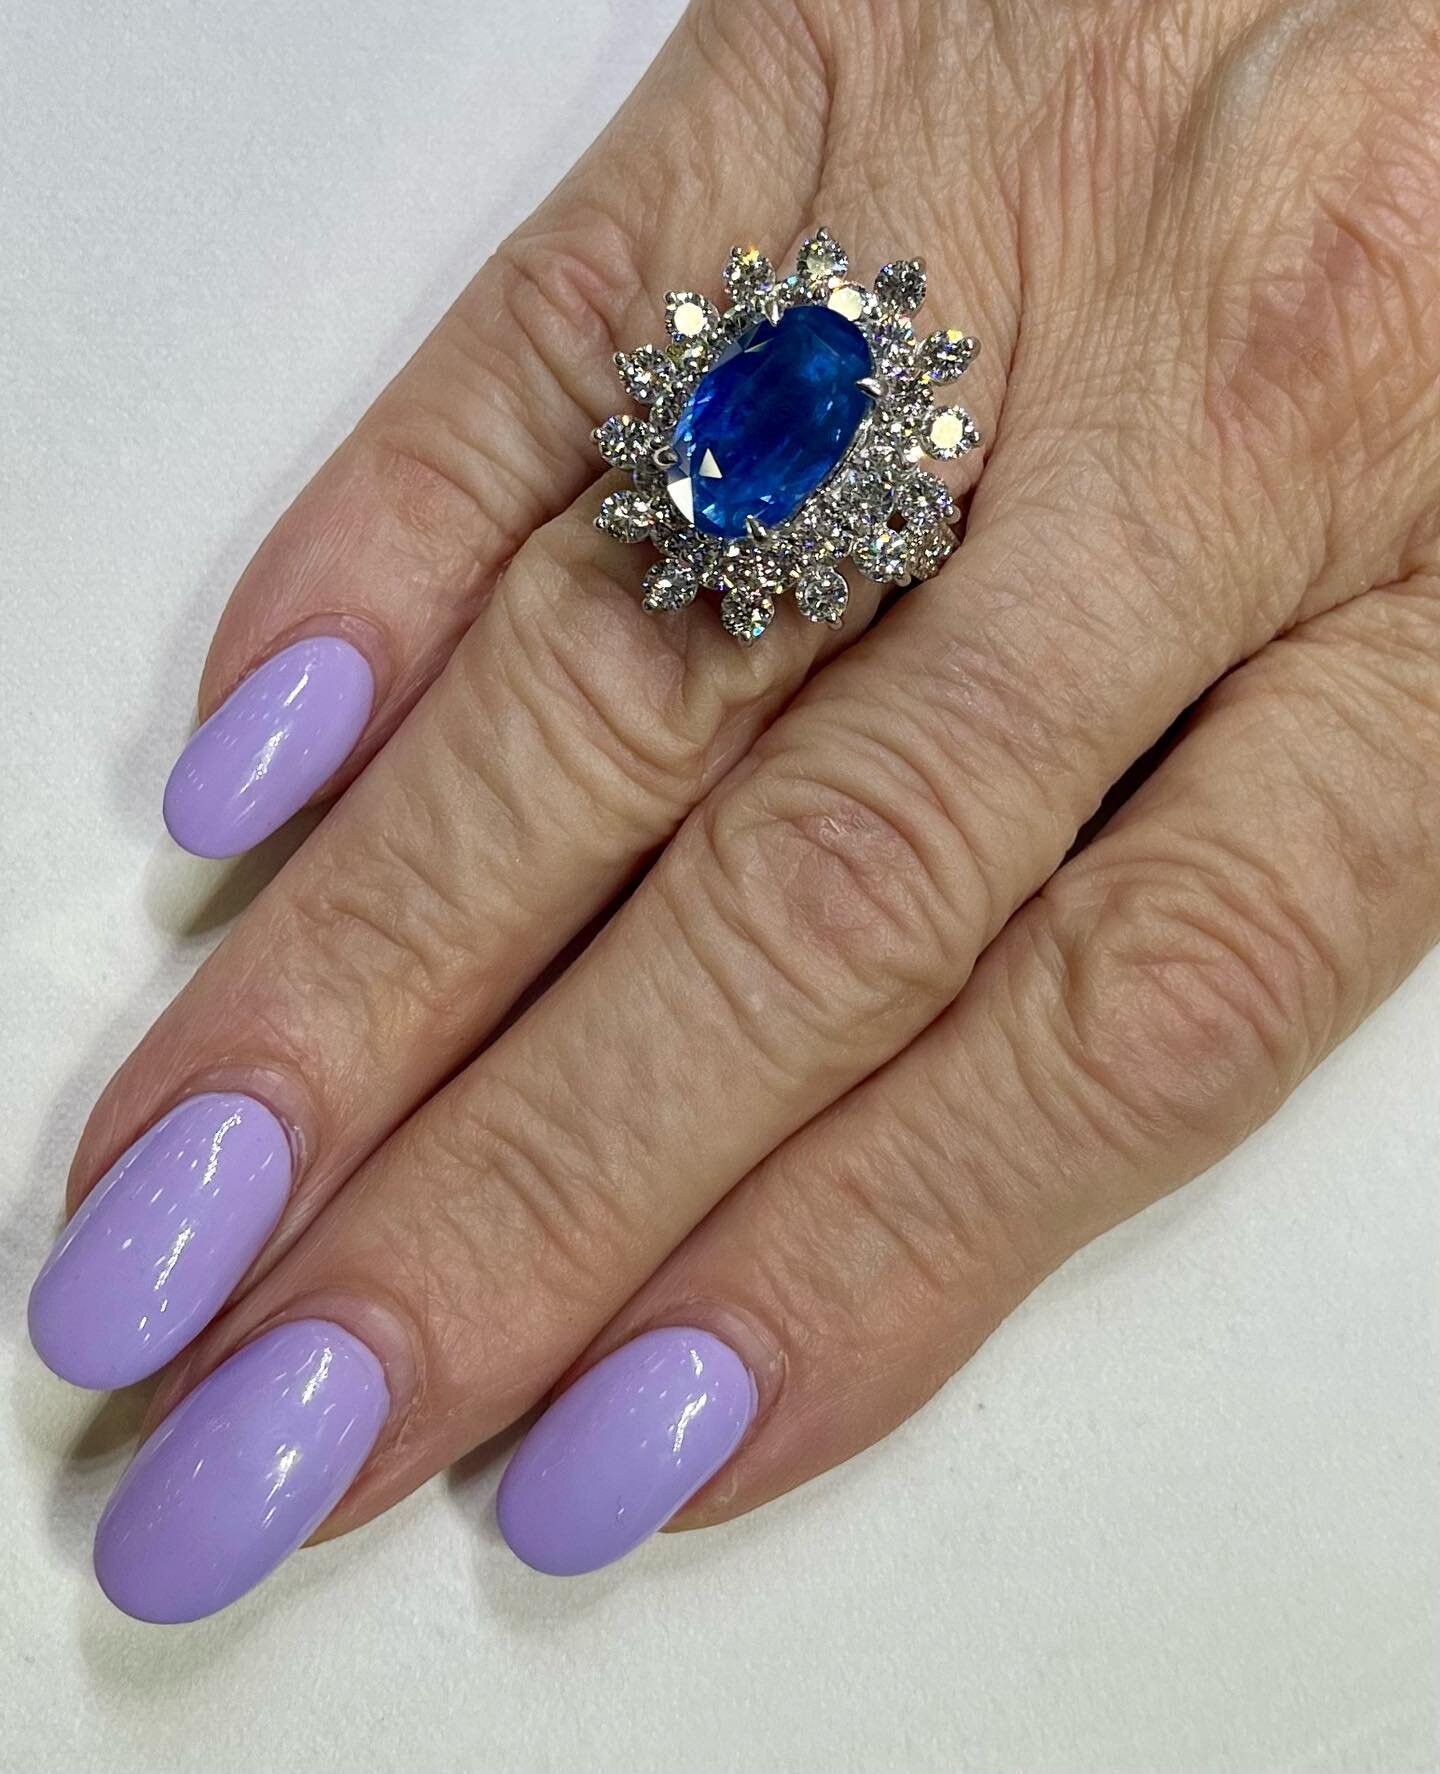 Did you know that Tiffany &amp; Co named the gemstone tanzanite to highlight its exclusive geographic origin,  introducing it with a campaign in 1968? 💎✨Highly prized for its rare beauty, this tanzanite &amp; diamond ring is a wonderful example of t